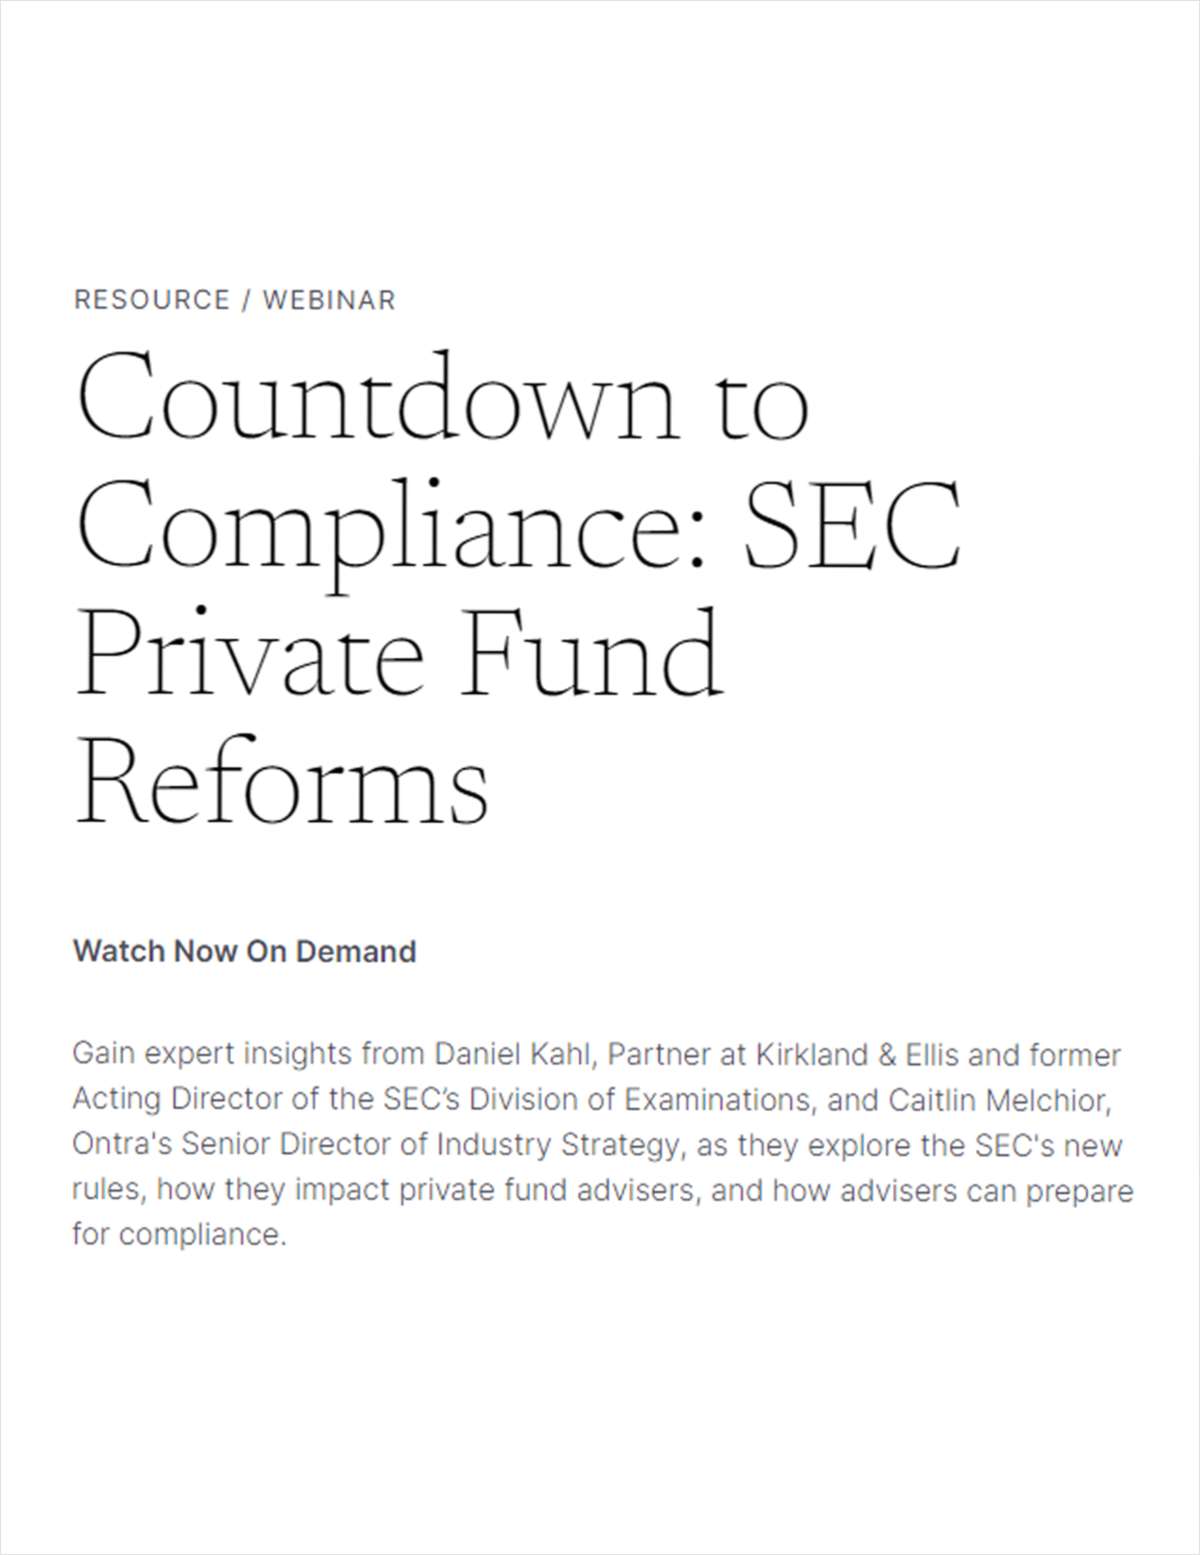 Countdown to Compliance: SEC Private Fund Reforms